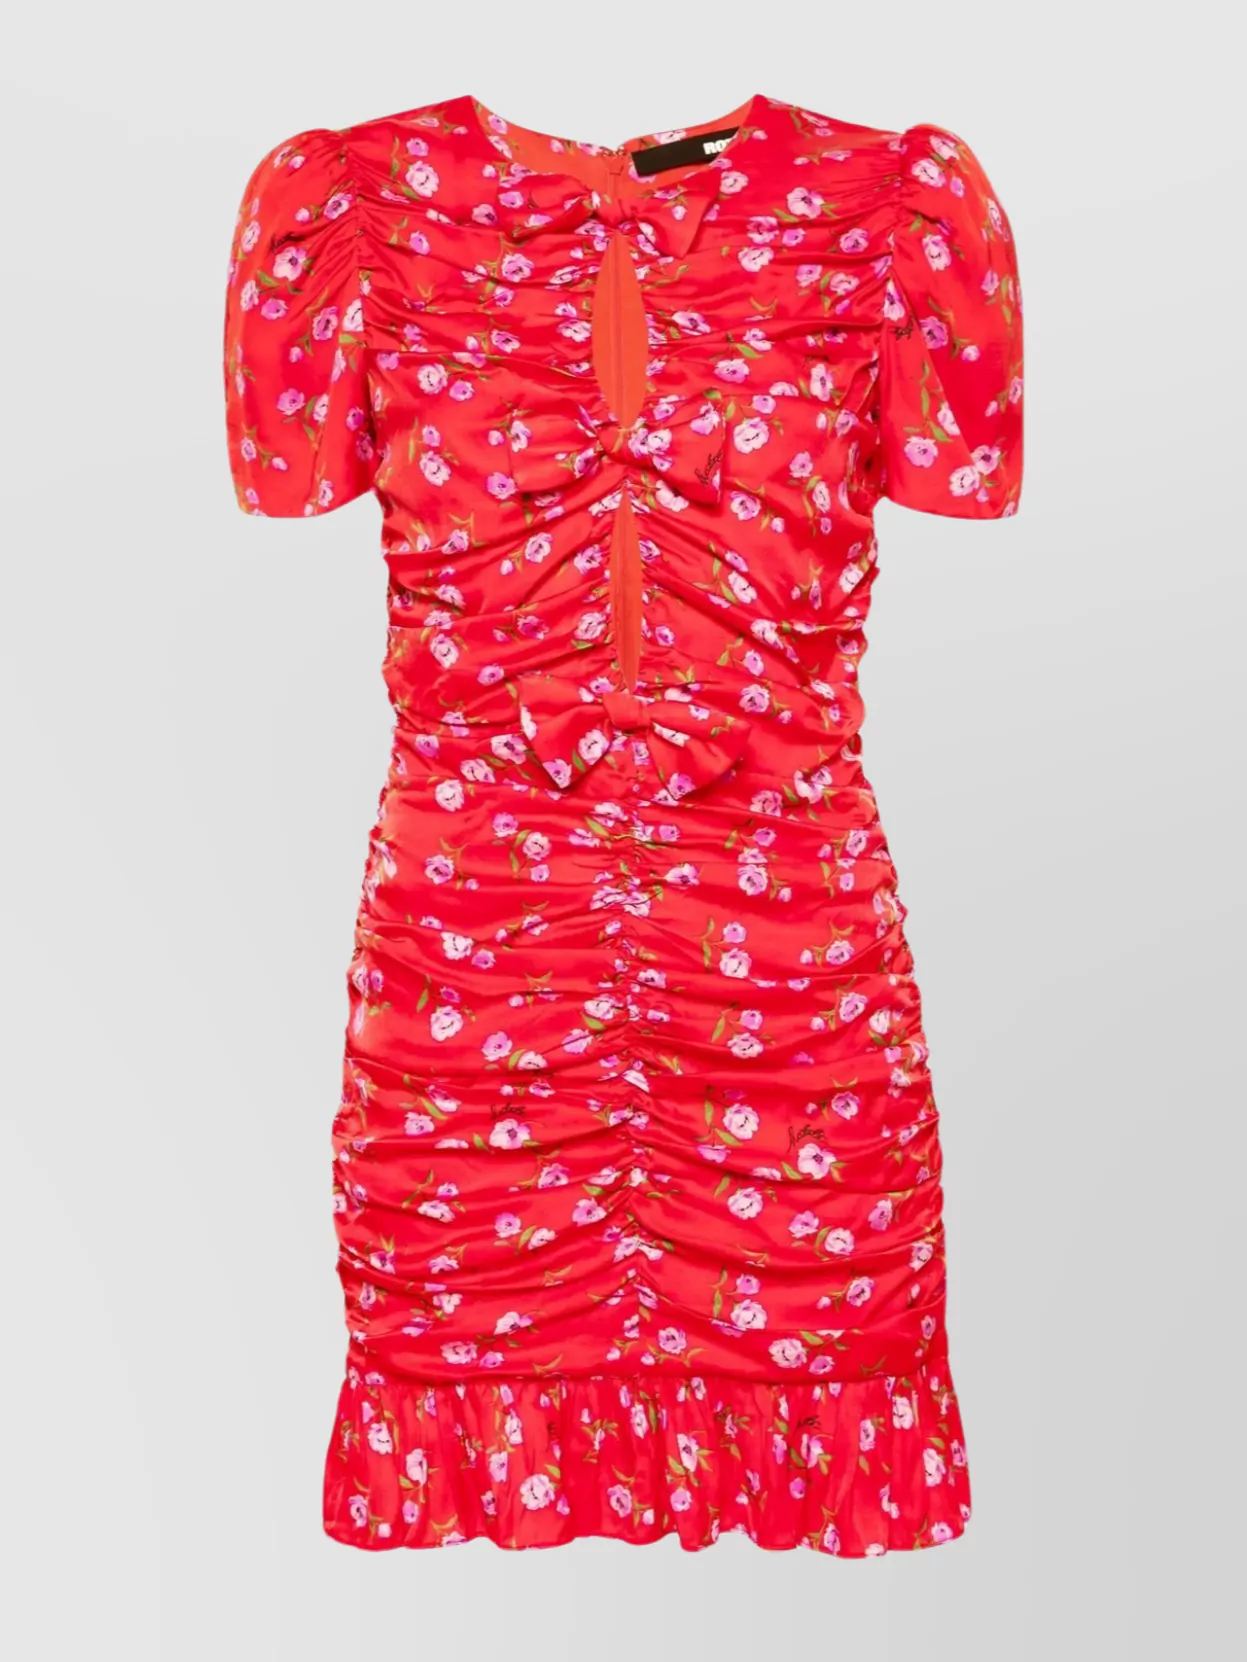 ROTATE BIRGER CHRISTENSEN MINI DRESS WITH FLORAL PRINT AND BOW DETAILING